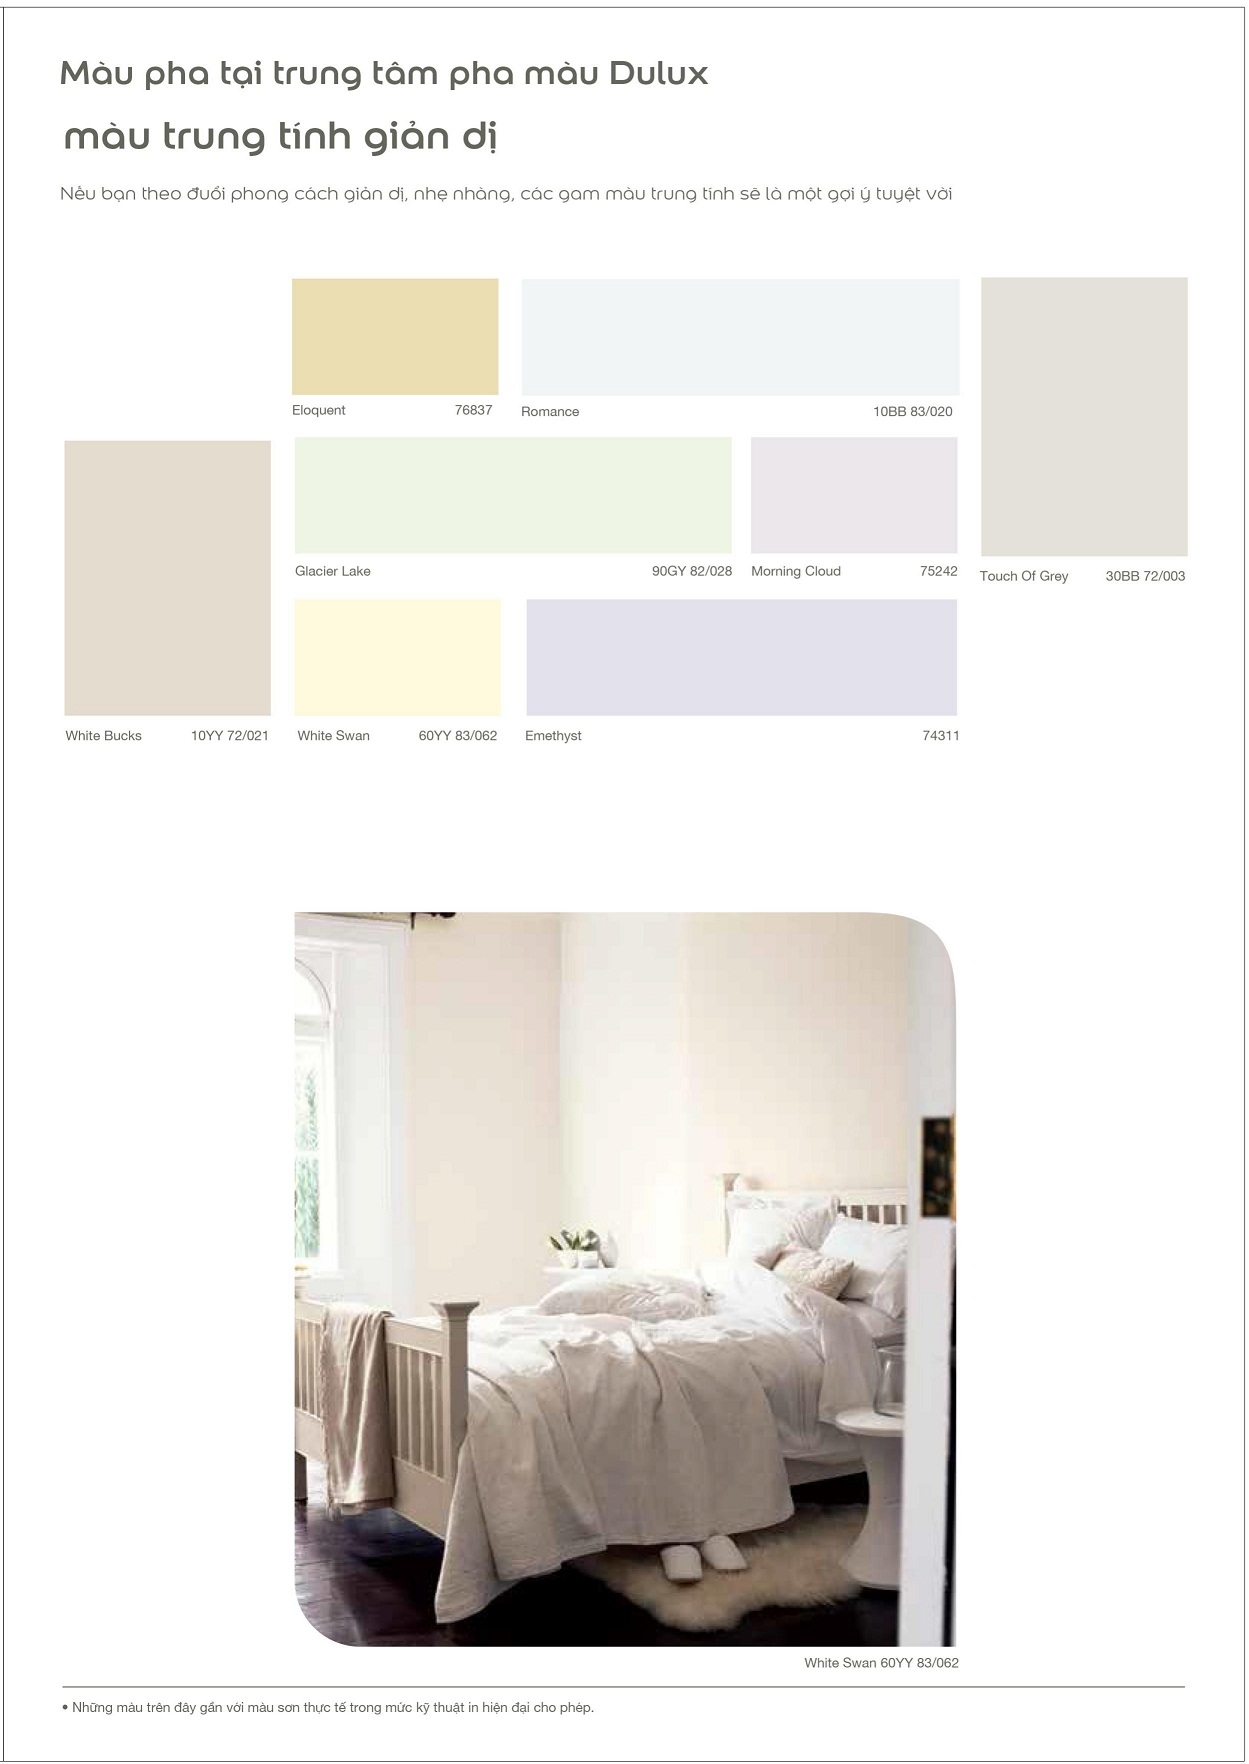 son-mai-anh-bang-mau-son-nuoc-dulux-trong-nha-dulux-inspire-y53-5